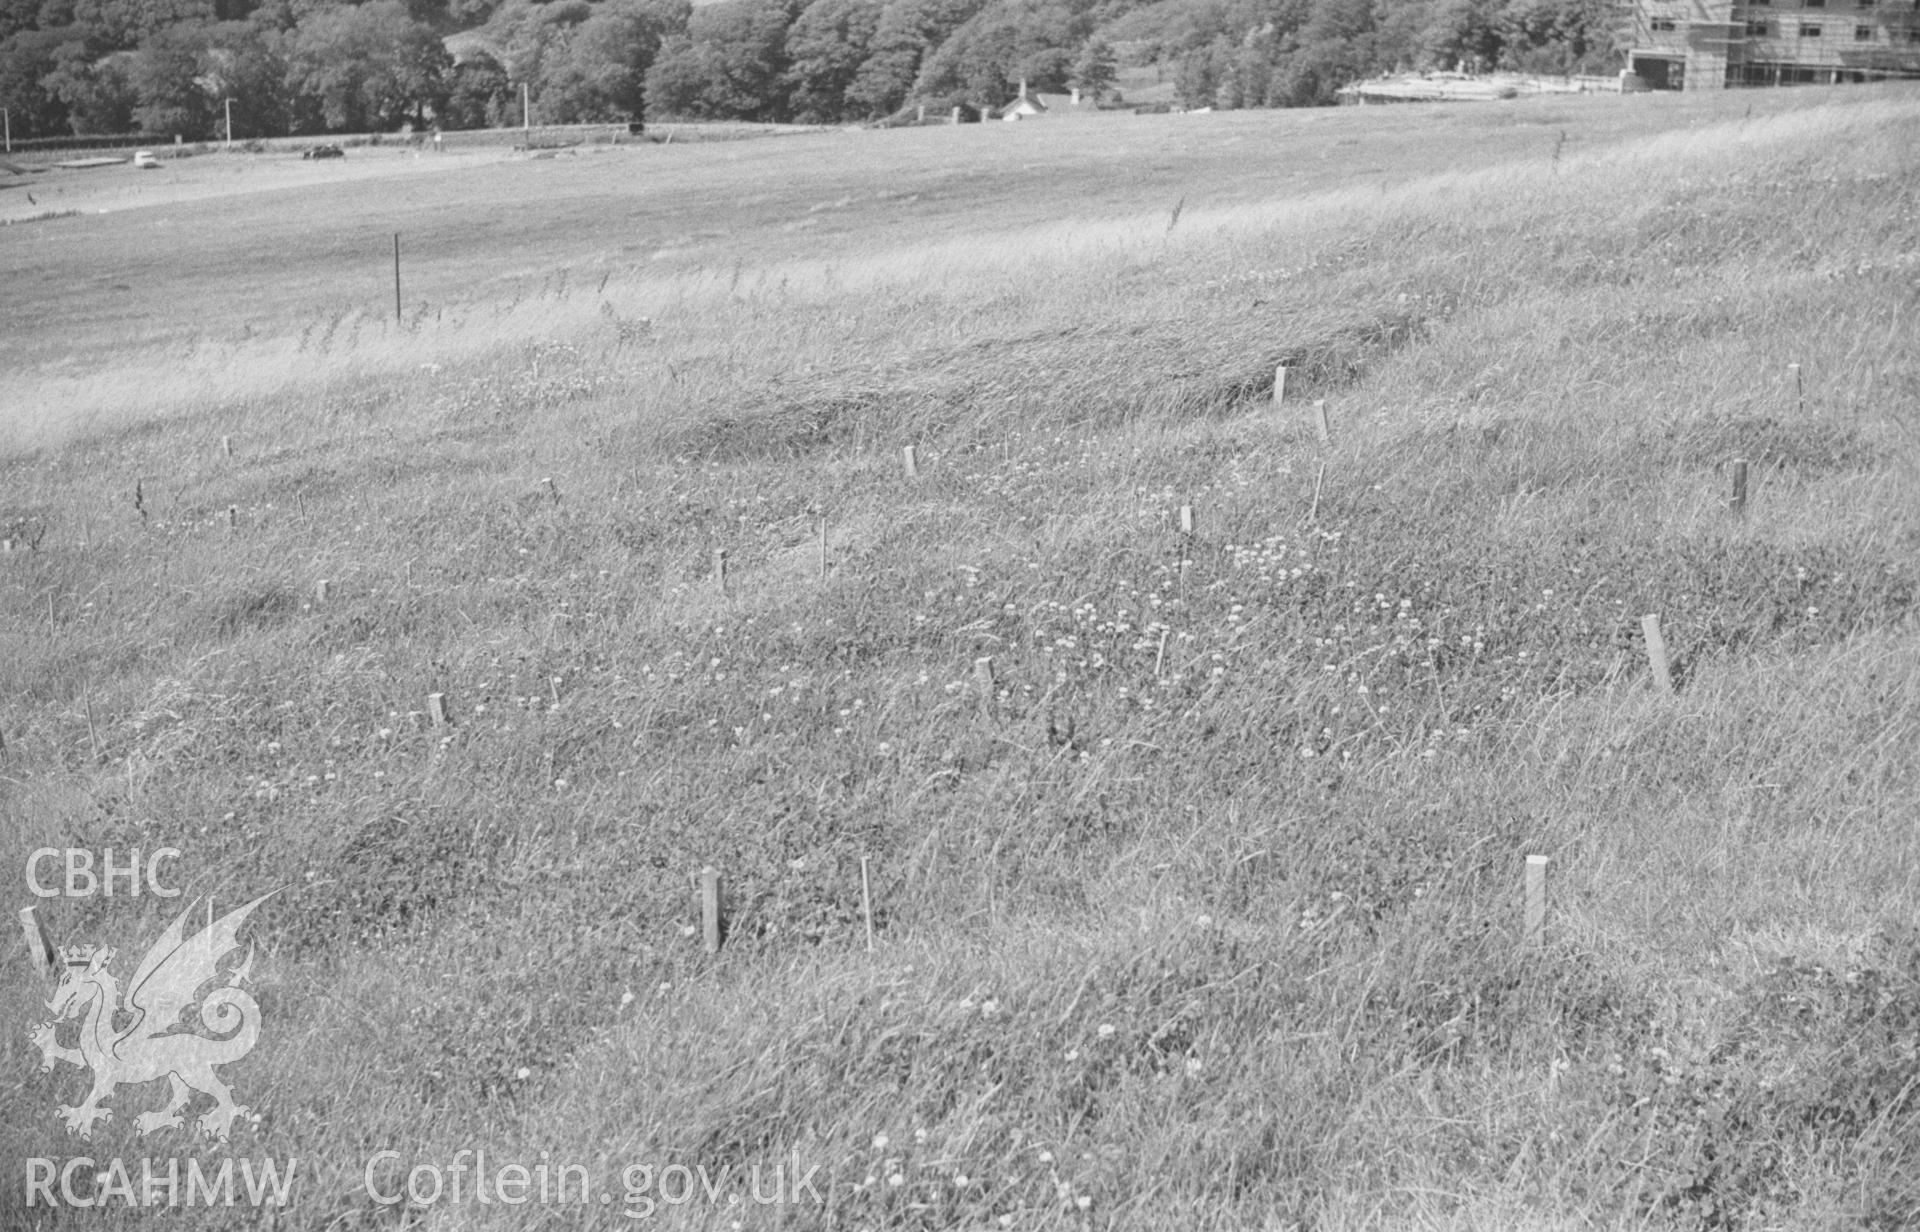 Black and White photograph showing University College Wales grass plots at Penglais, Aberystwyth. Photographed by Arthur Chater, August 1962. Grid Reference: SN 597 818.